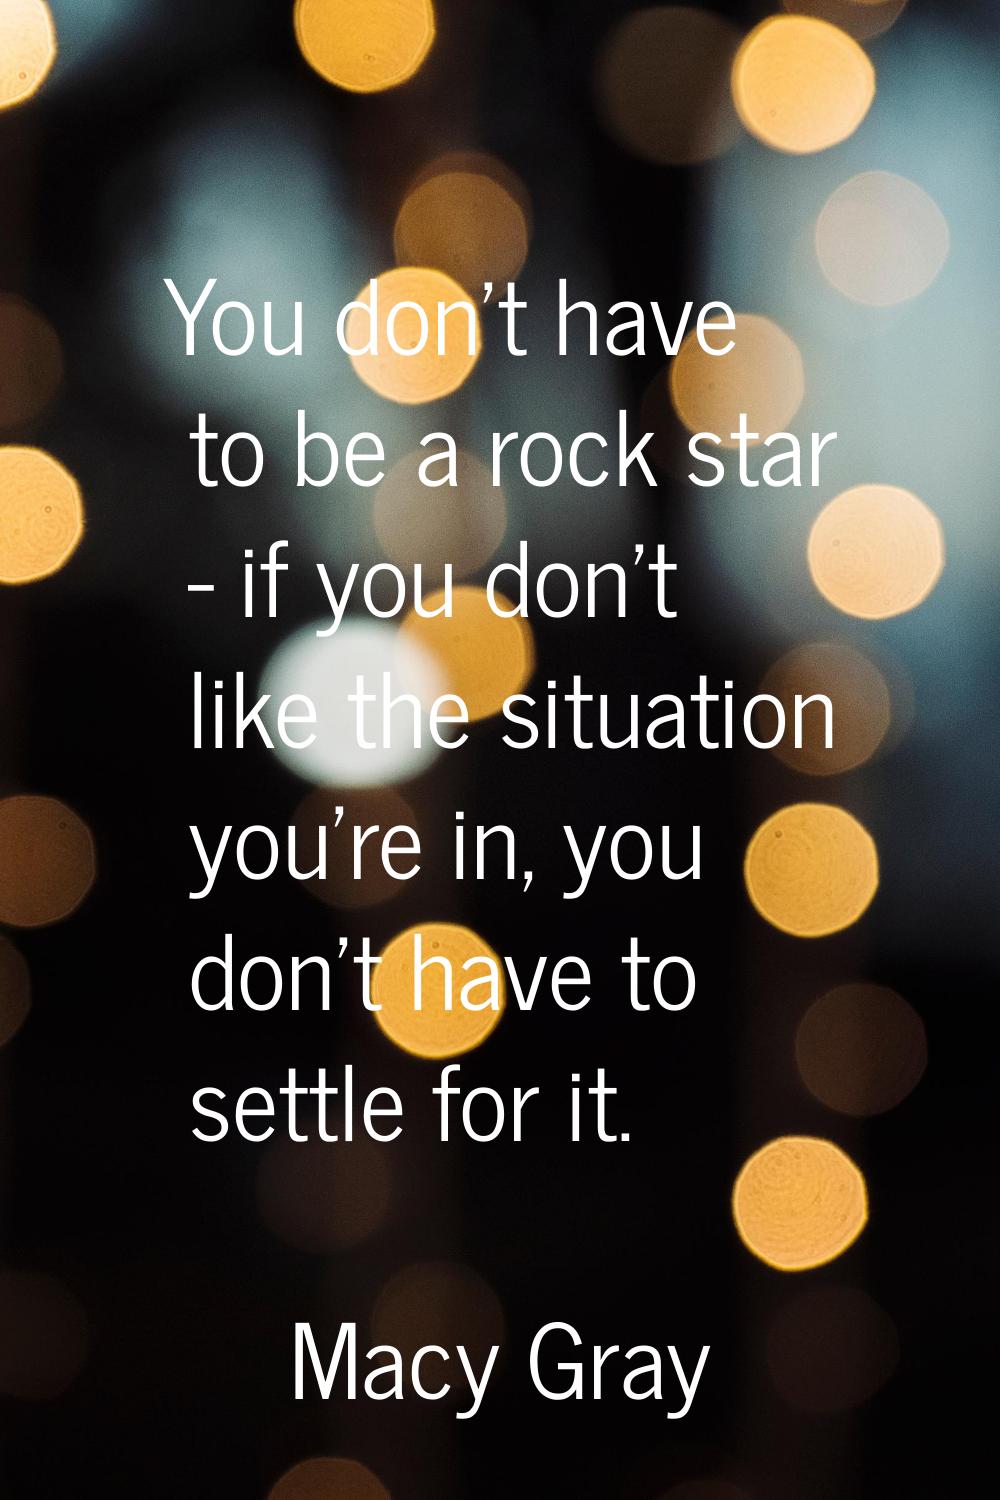 You don't have to be a rock star - if you don't like the situation you're in, you don't have to set